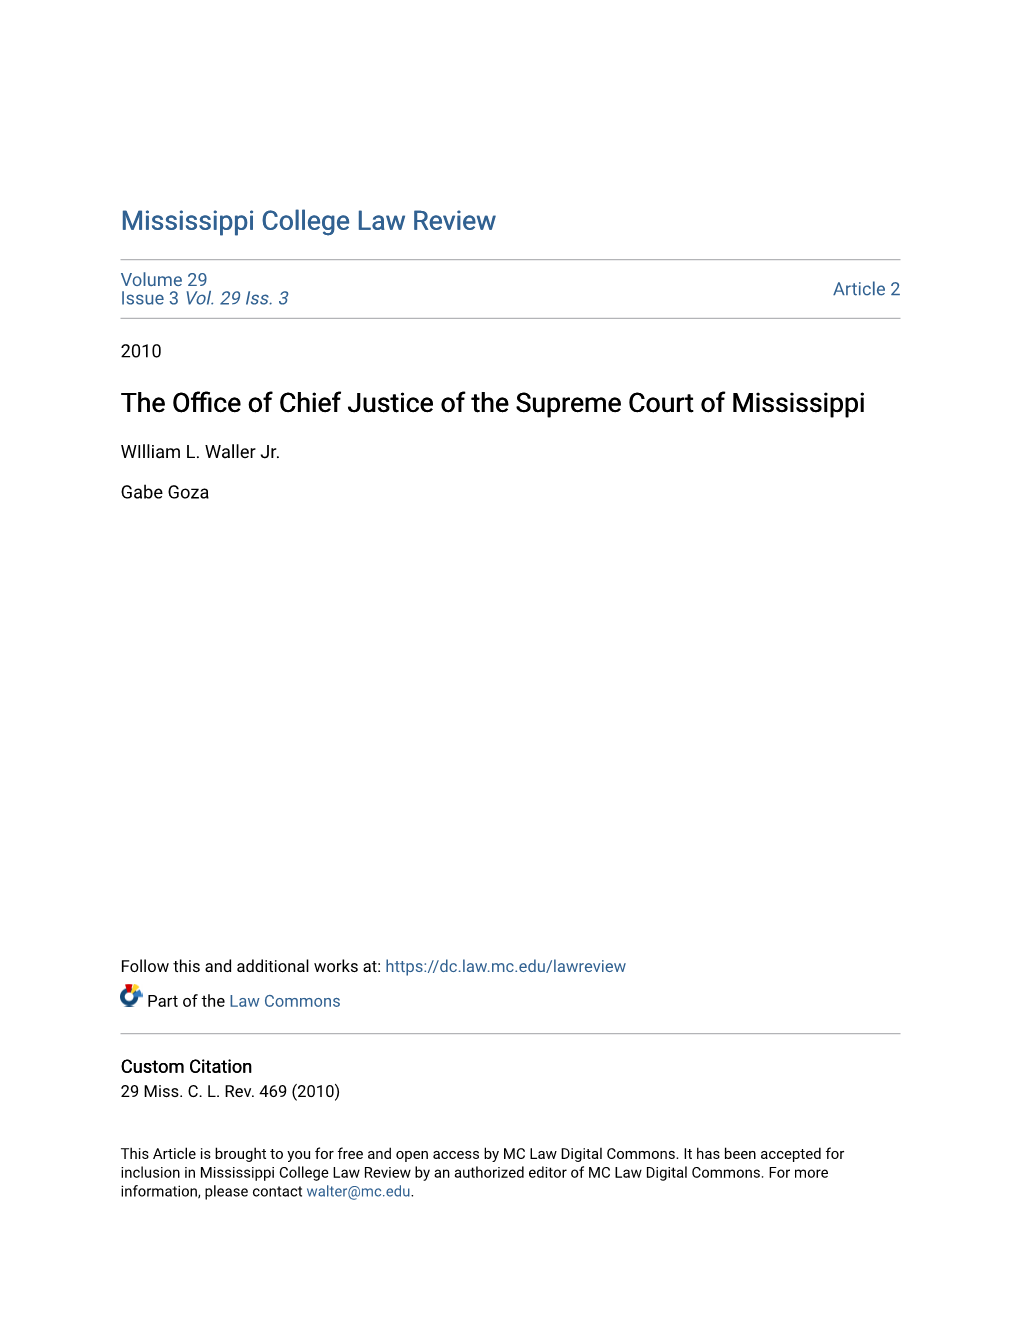 The Office of Chief Justice of the Supreme Court of Mississippi